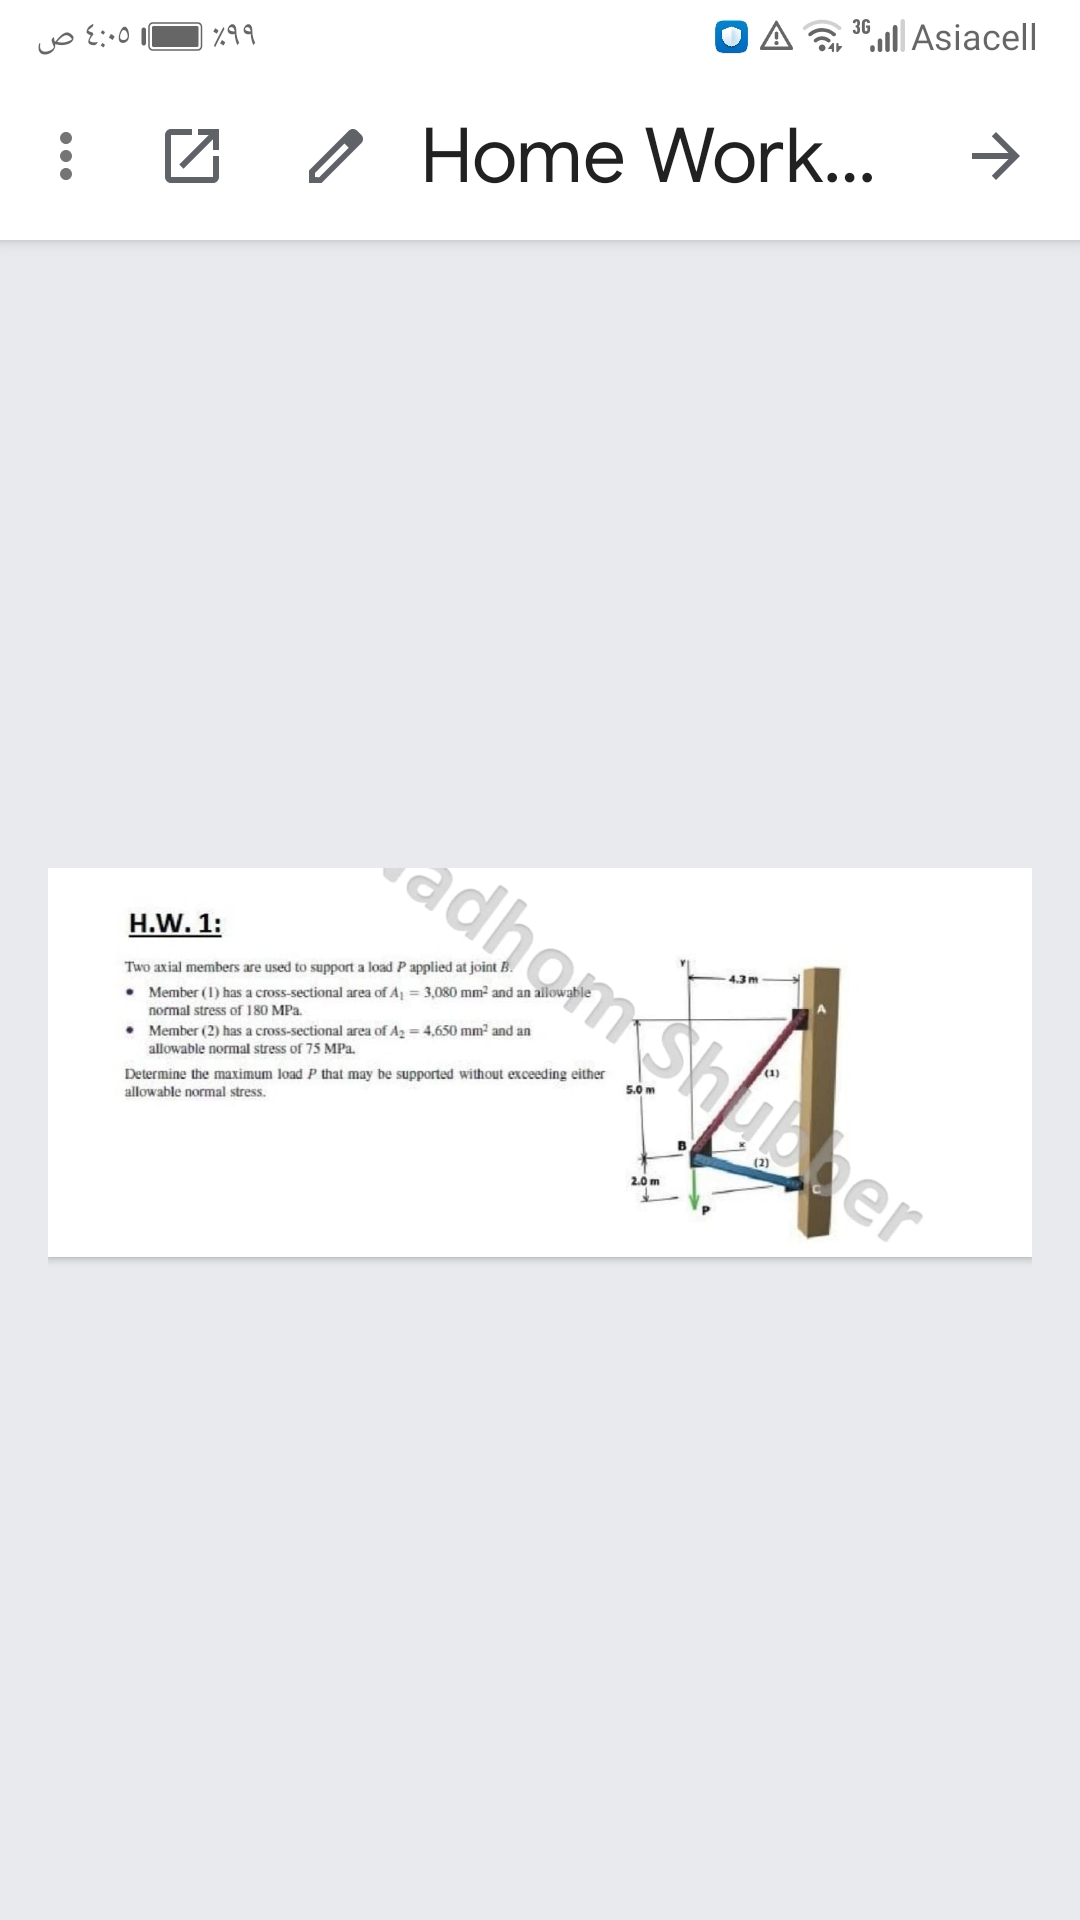 3G
“. Asiacell
%99
Home Work...
adhomShupper
H.W. 1:
4.3 m
Two axial members are used to support a load P applied at joint B.
• Member (1) has a cross-sectional area of A = 3,080 mm2 and an allowabl
normal stress of 180 MPa.
• Member (2) has a cross-sectional area of Az = 4,650 mm2 and an
allowable normal stress of 75 MPa.
Determine the maximum load P that may be supported without exceeding either
allowable normal stress.
5.0 m
2.0 m
